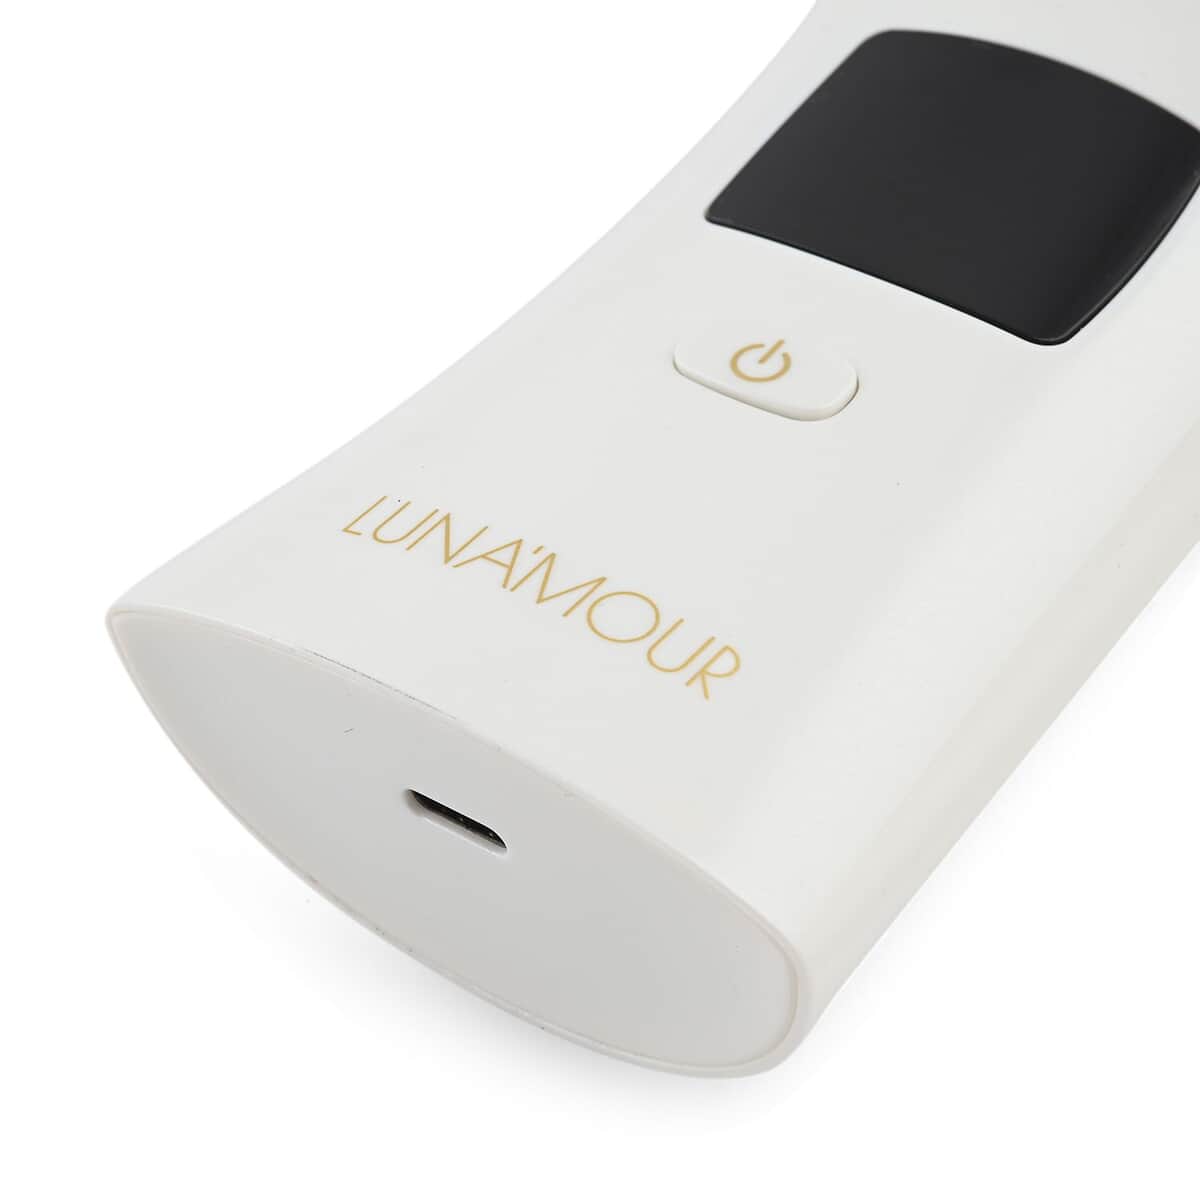 Luna'Mour 3-in-1 ElectraLume System Anti-Aging Microcurrent + Light Therapy Device image number 4